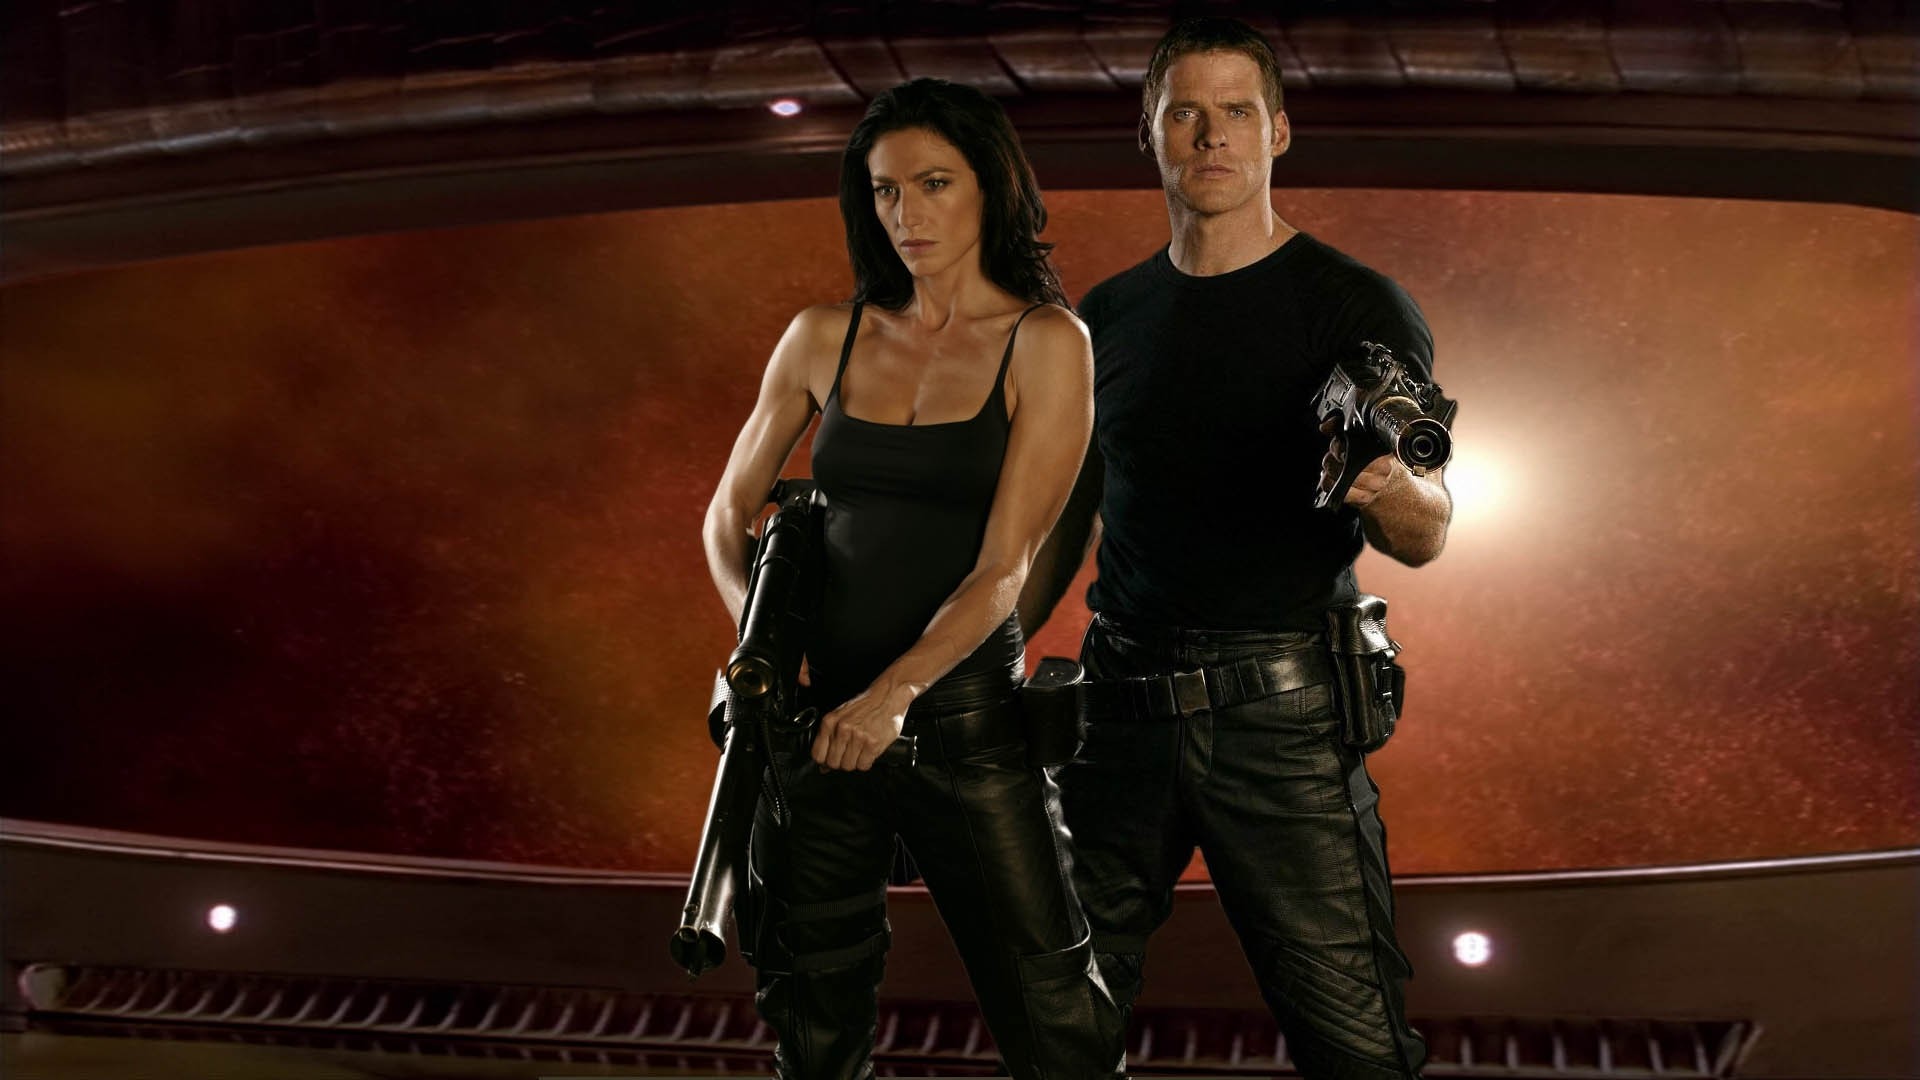 1920x1080 Keys: farscape, wallpapers, wallpaper. Submitted Anonymously 4 years ago